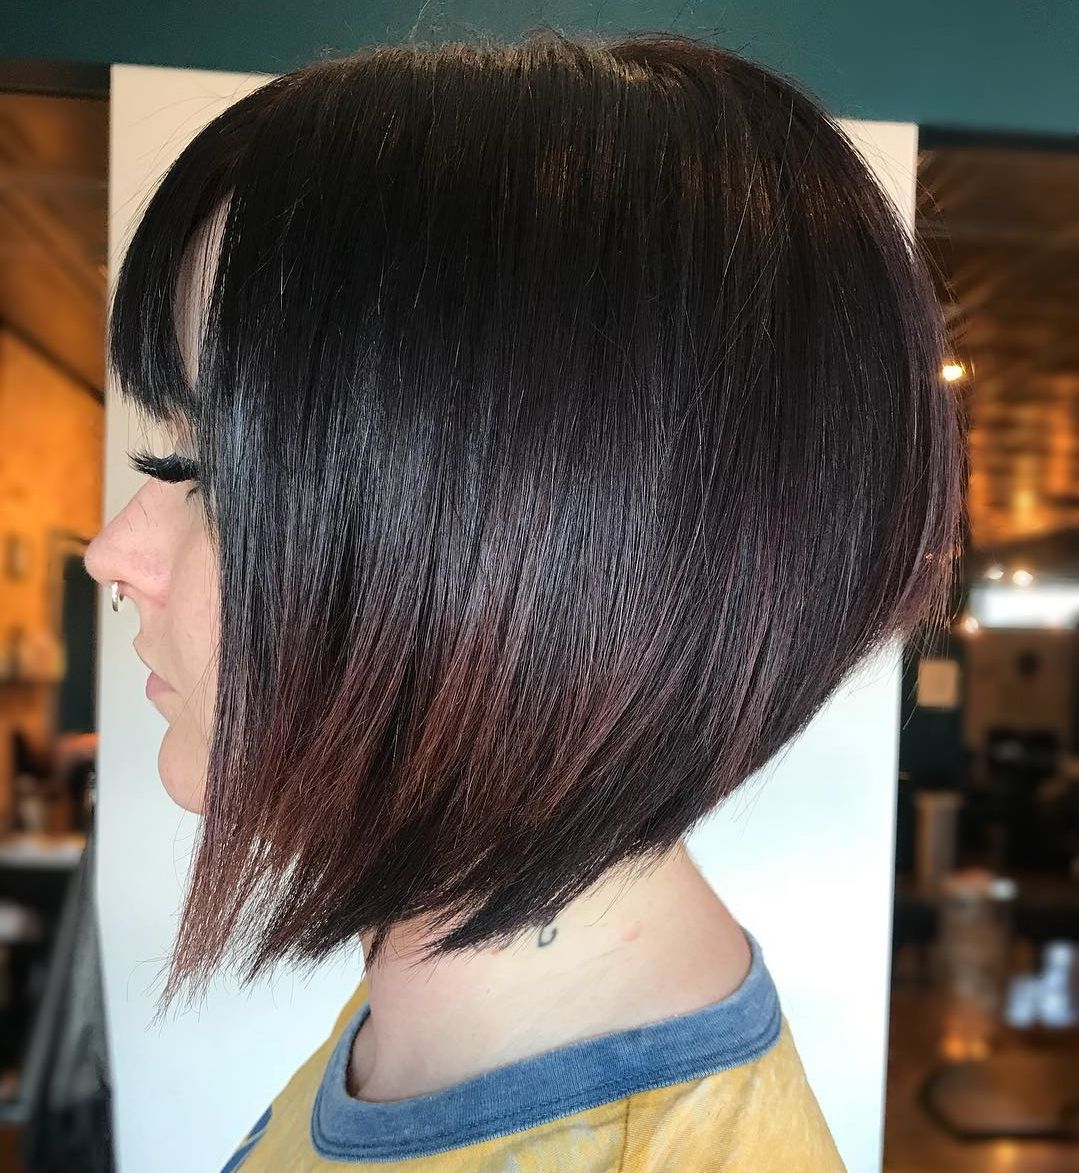 45 Short Hairstyles For Fine Hair To Rock In 2020 For 2018 Short Black Bob Hairstyles With Bangs (View 17 of 20)